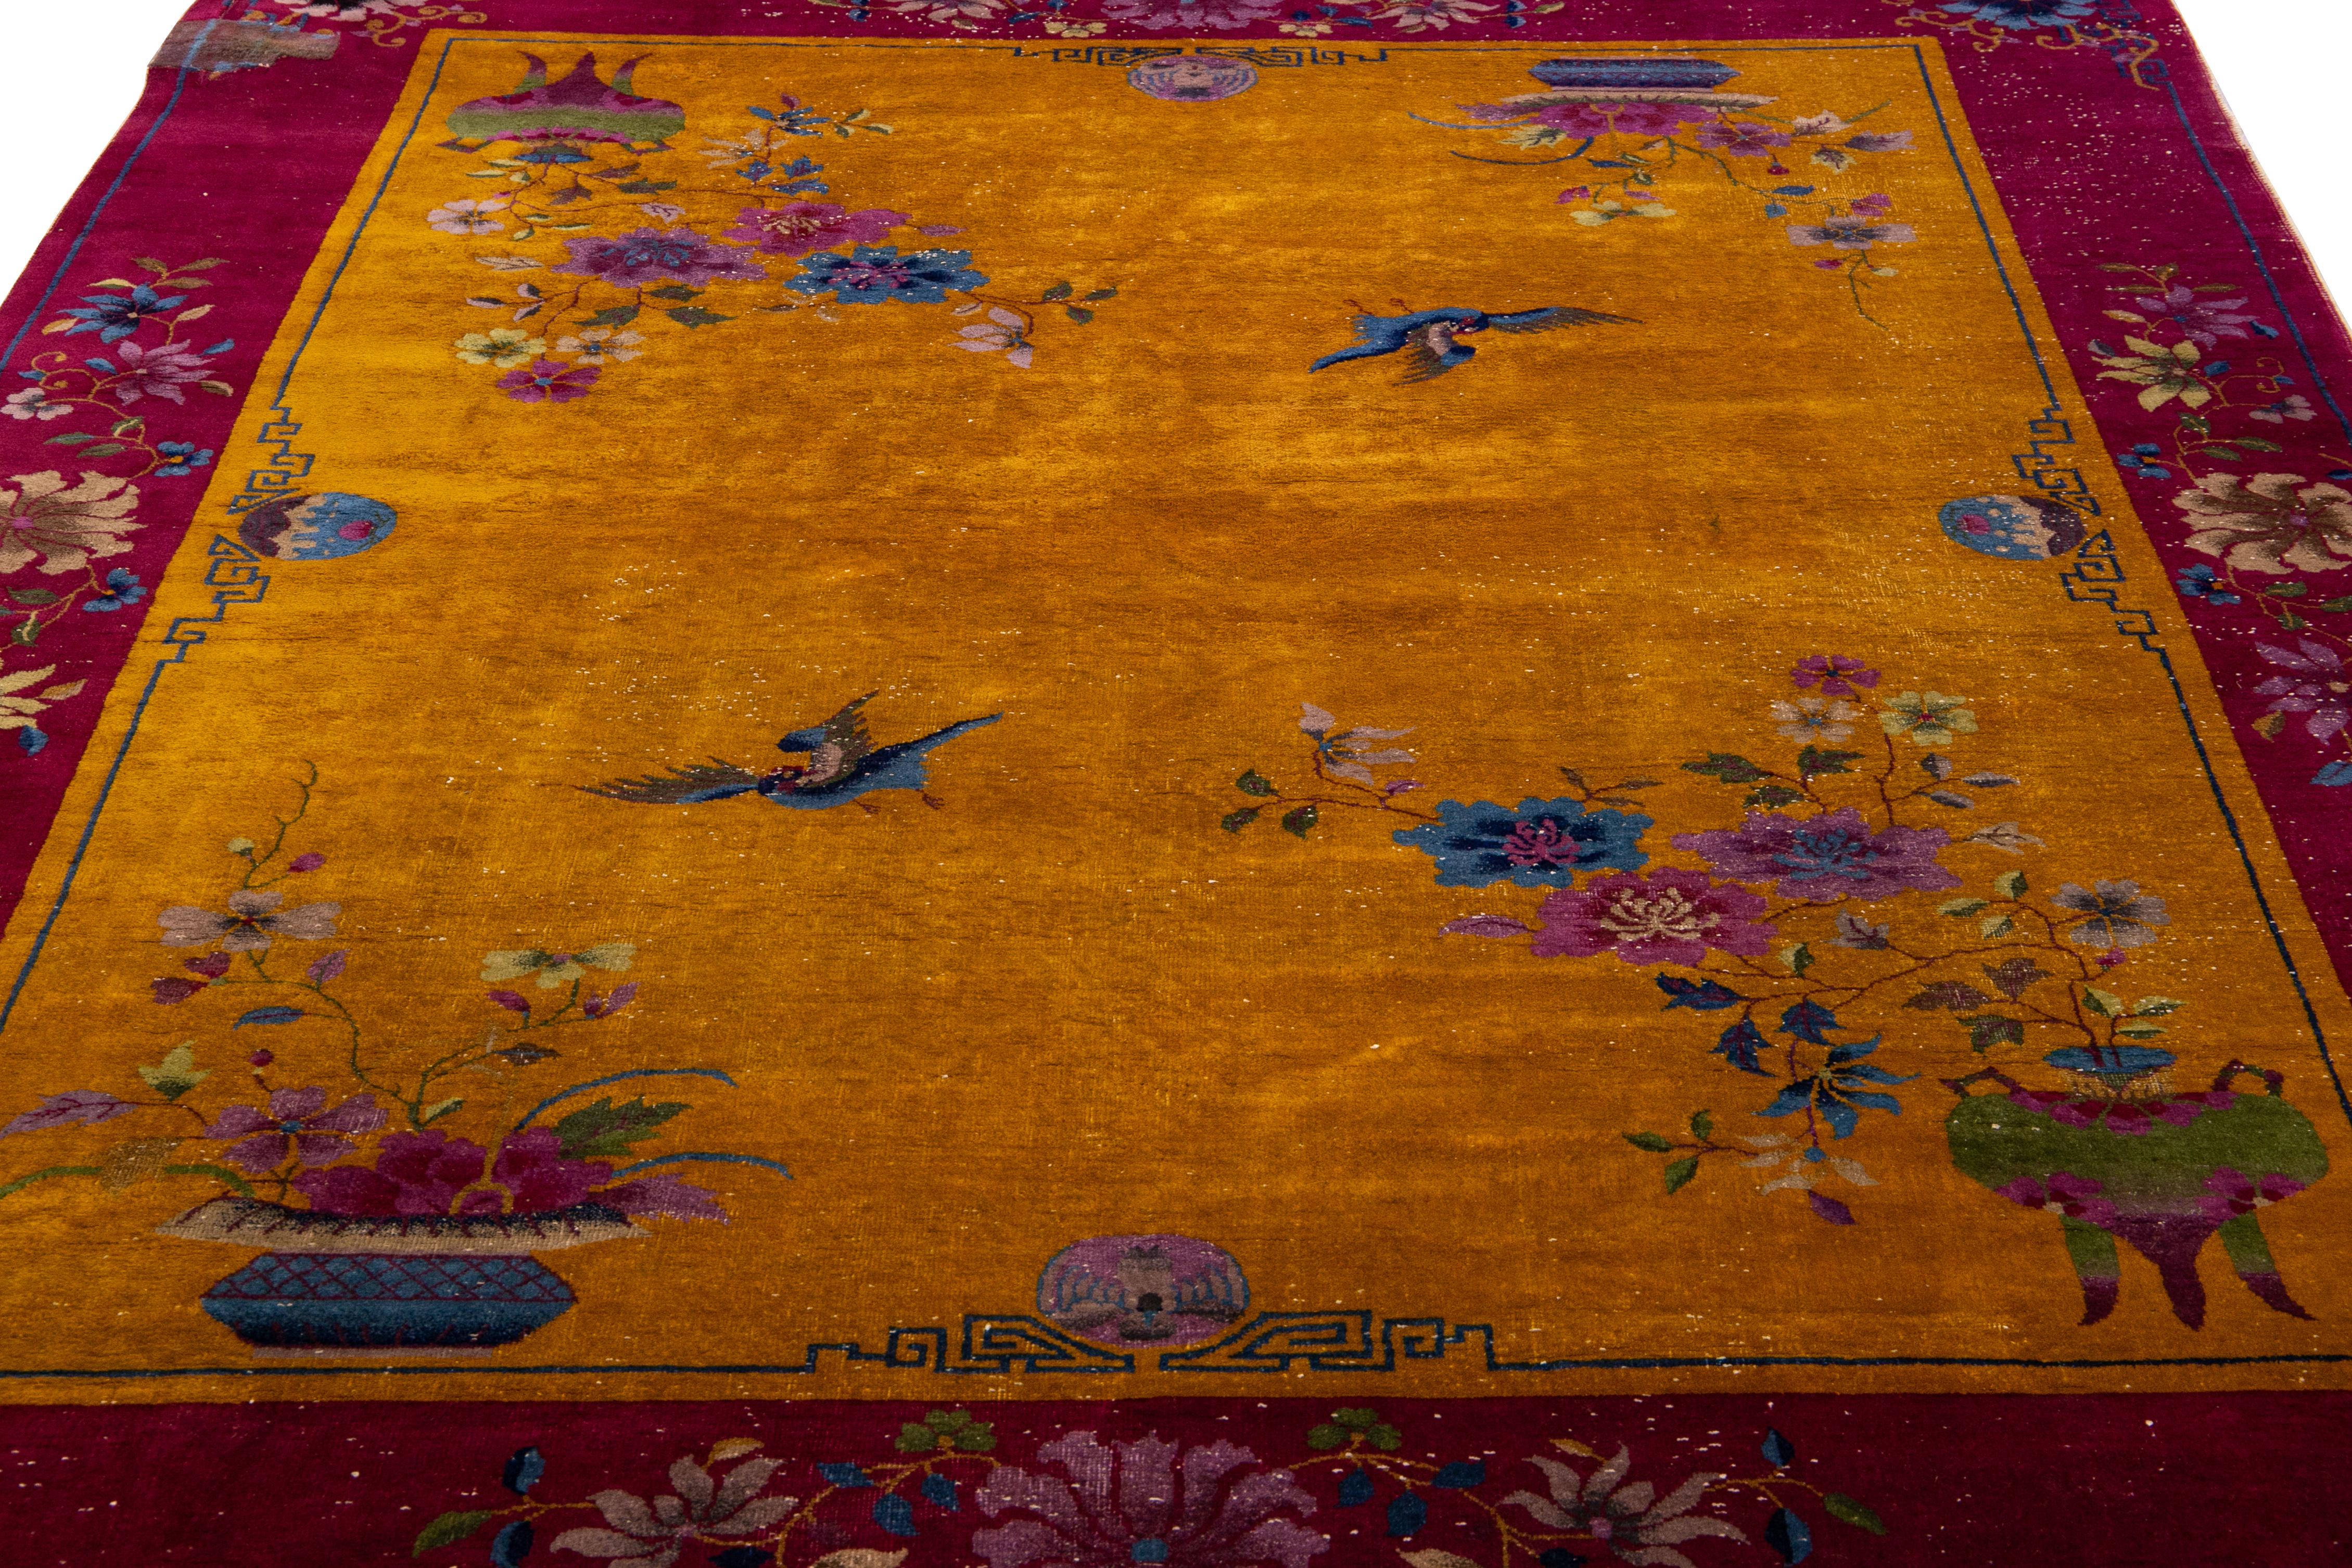 chinese floral wool rugs